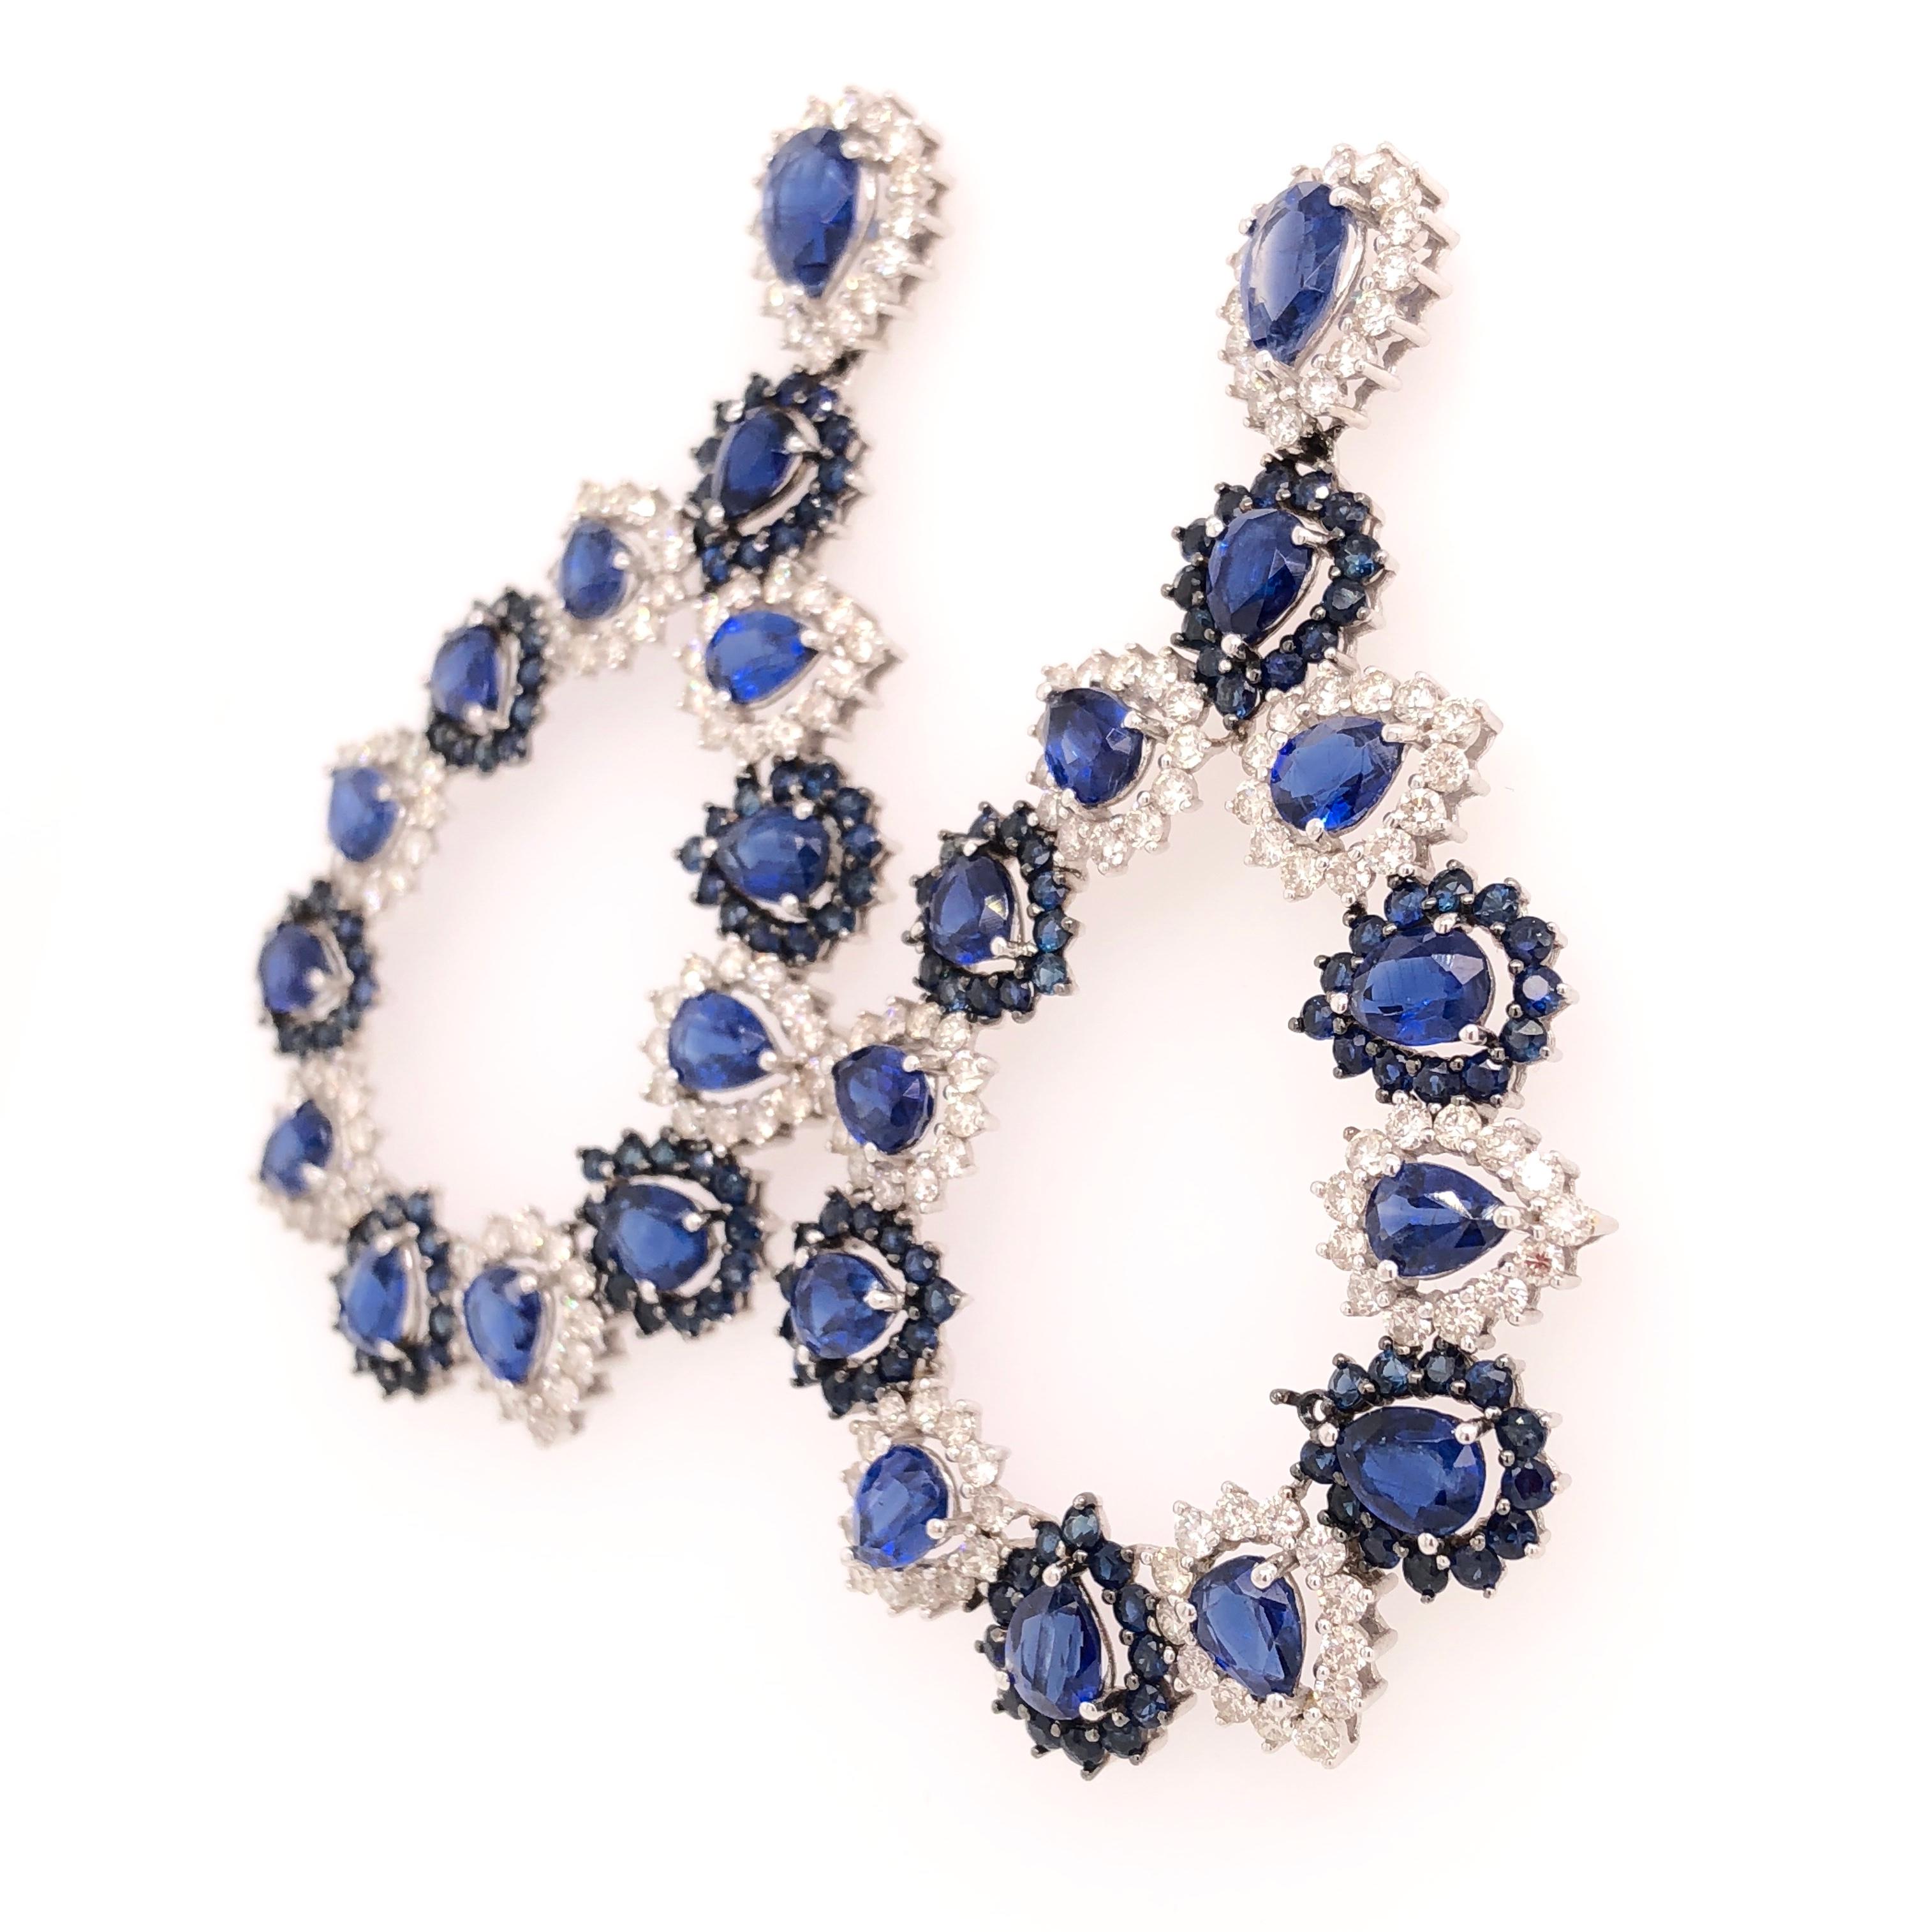 18K White Gold.
Sapphire: 3.93ct total weight.
Kyanite: 11.75ct total weight.
Diamonds: 3.60ct total weight.
All diamonds are G-H/SI stones.
Width - is approximately 3.3cm/1.30inches.
Height - is approximately 6cm/2.37inches.